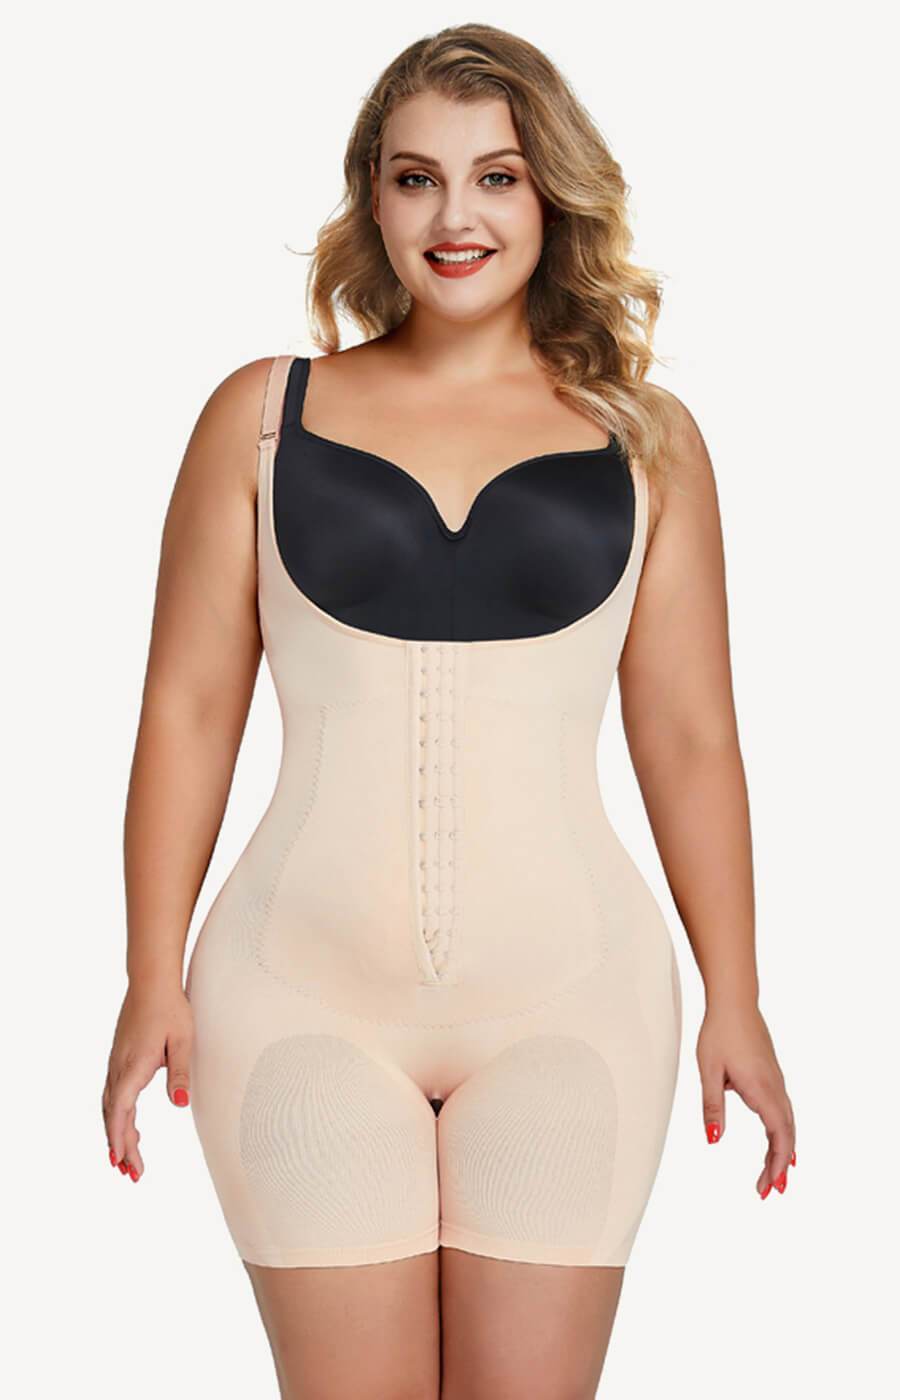 When Buy Shapewear, What Should We Know